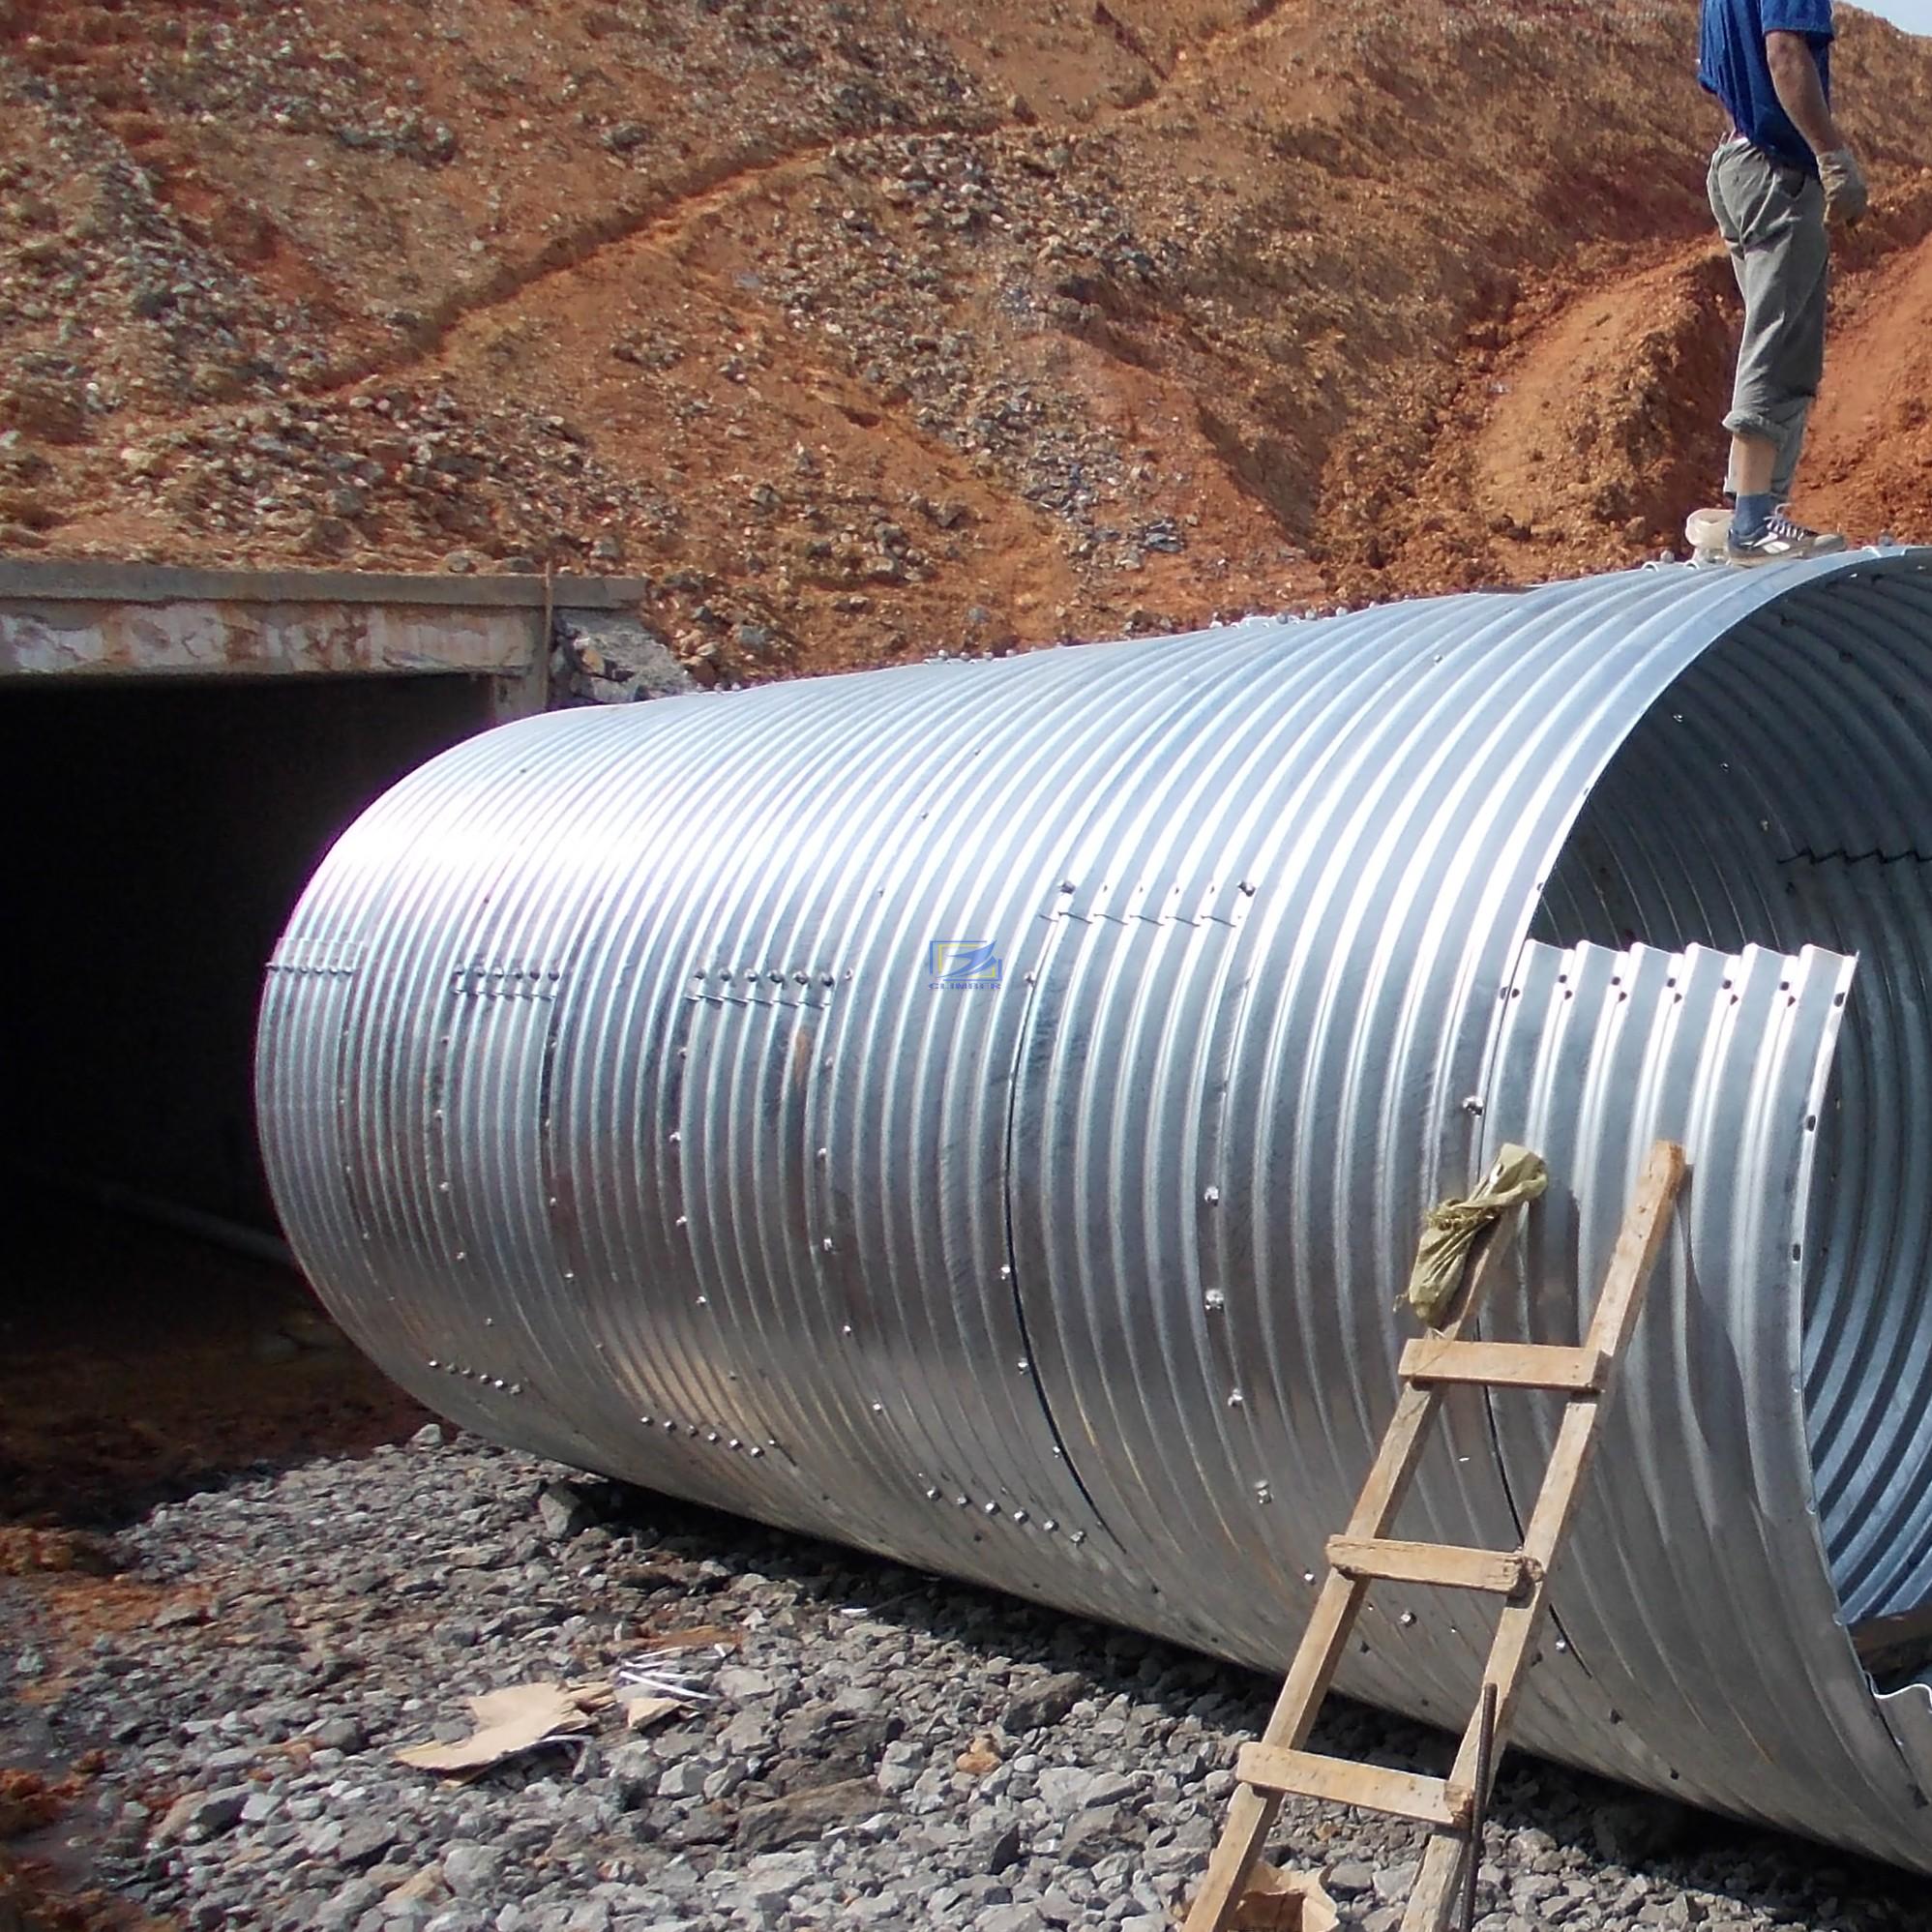 wholesale the corrugated steel pipe and culvert pipe in Kenya